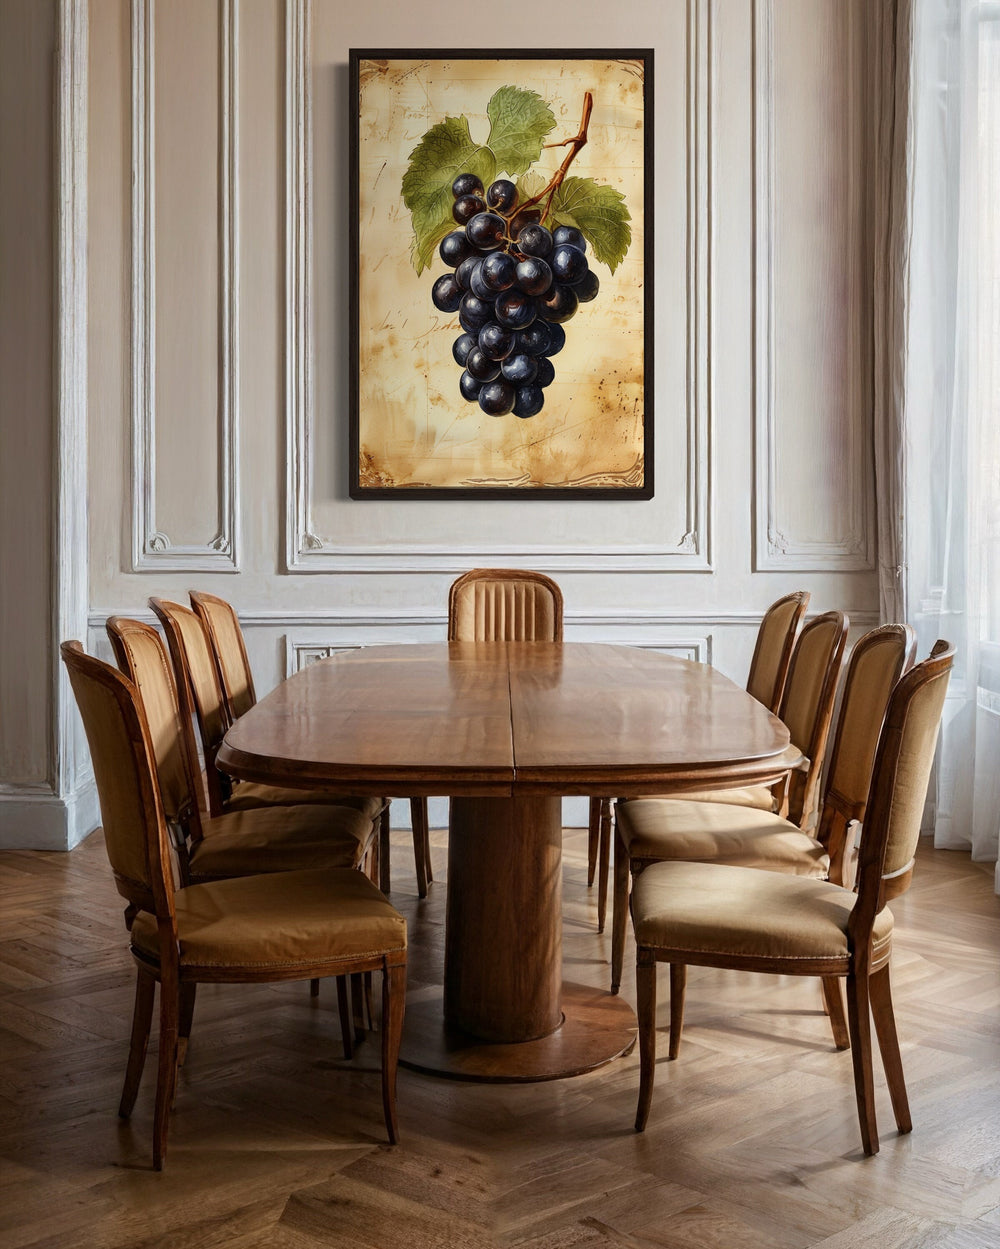 Vintage Grapes Painting Framed Canvas Fruit Wall Art For Kitchen